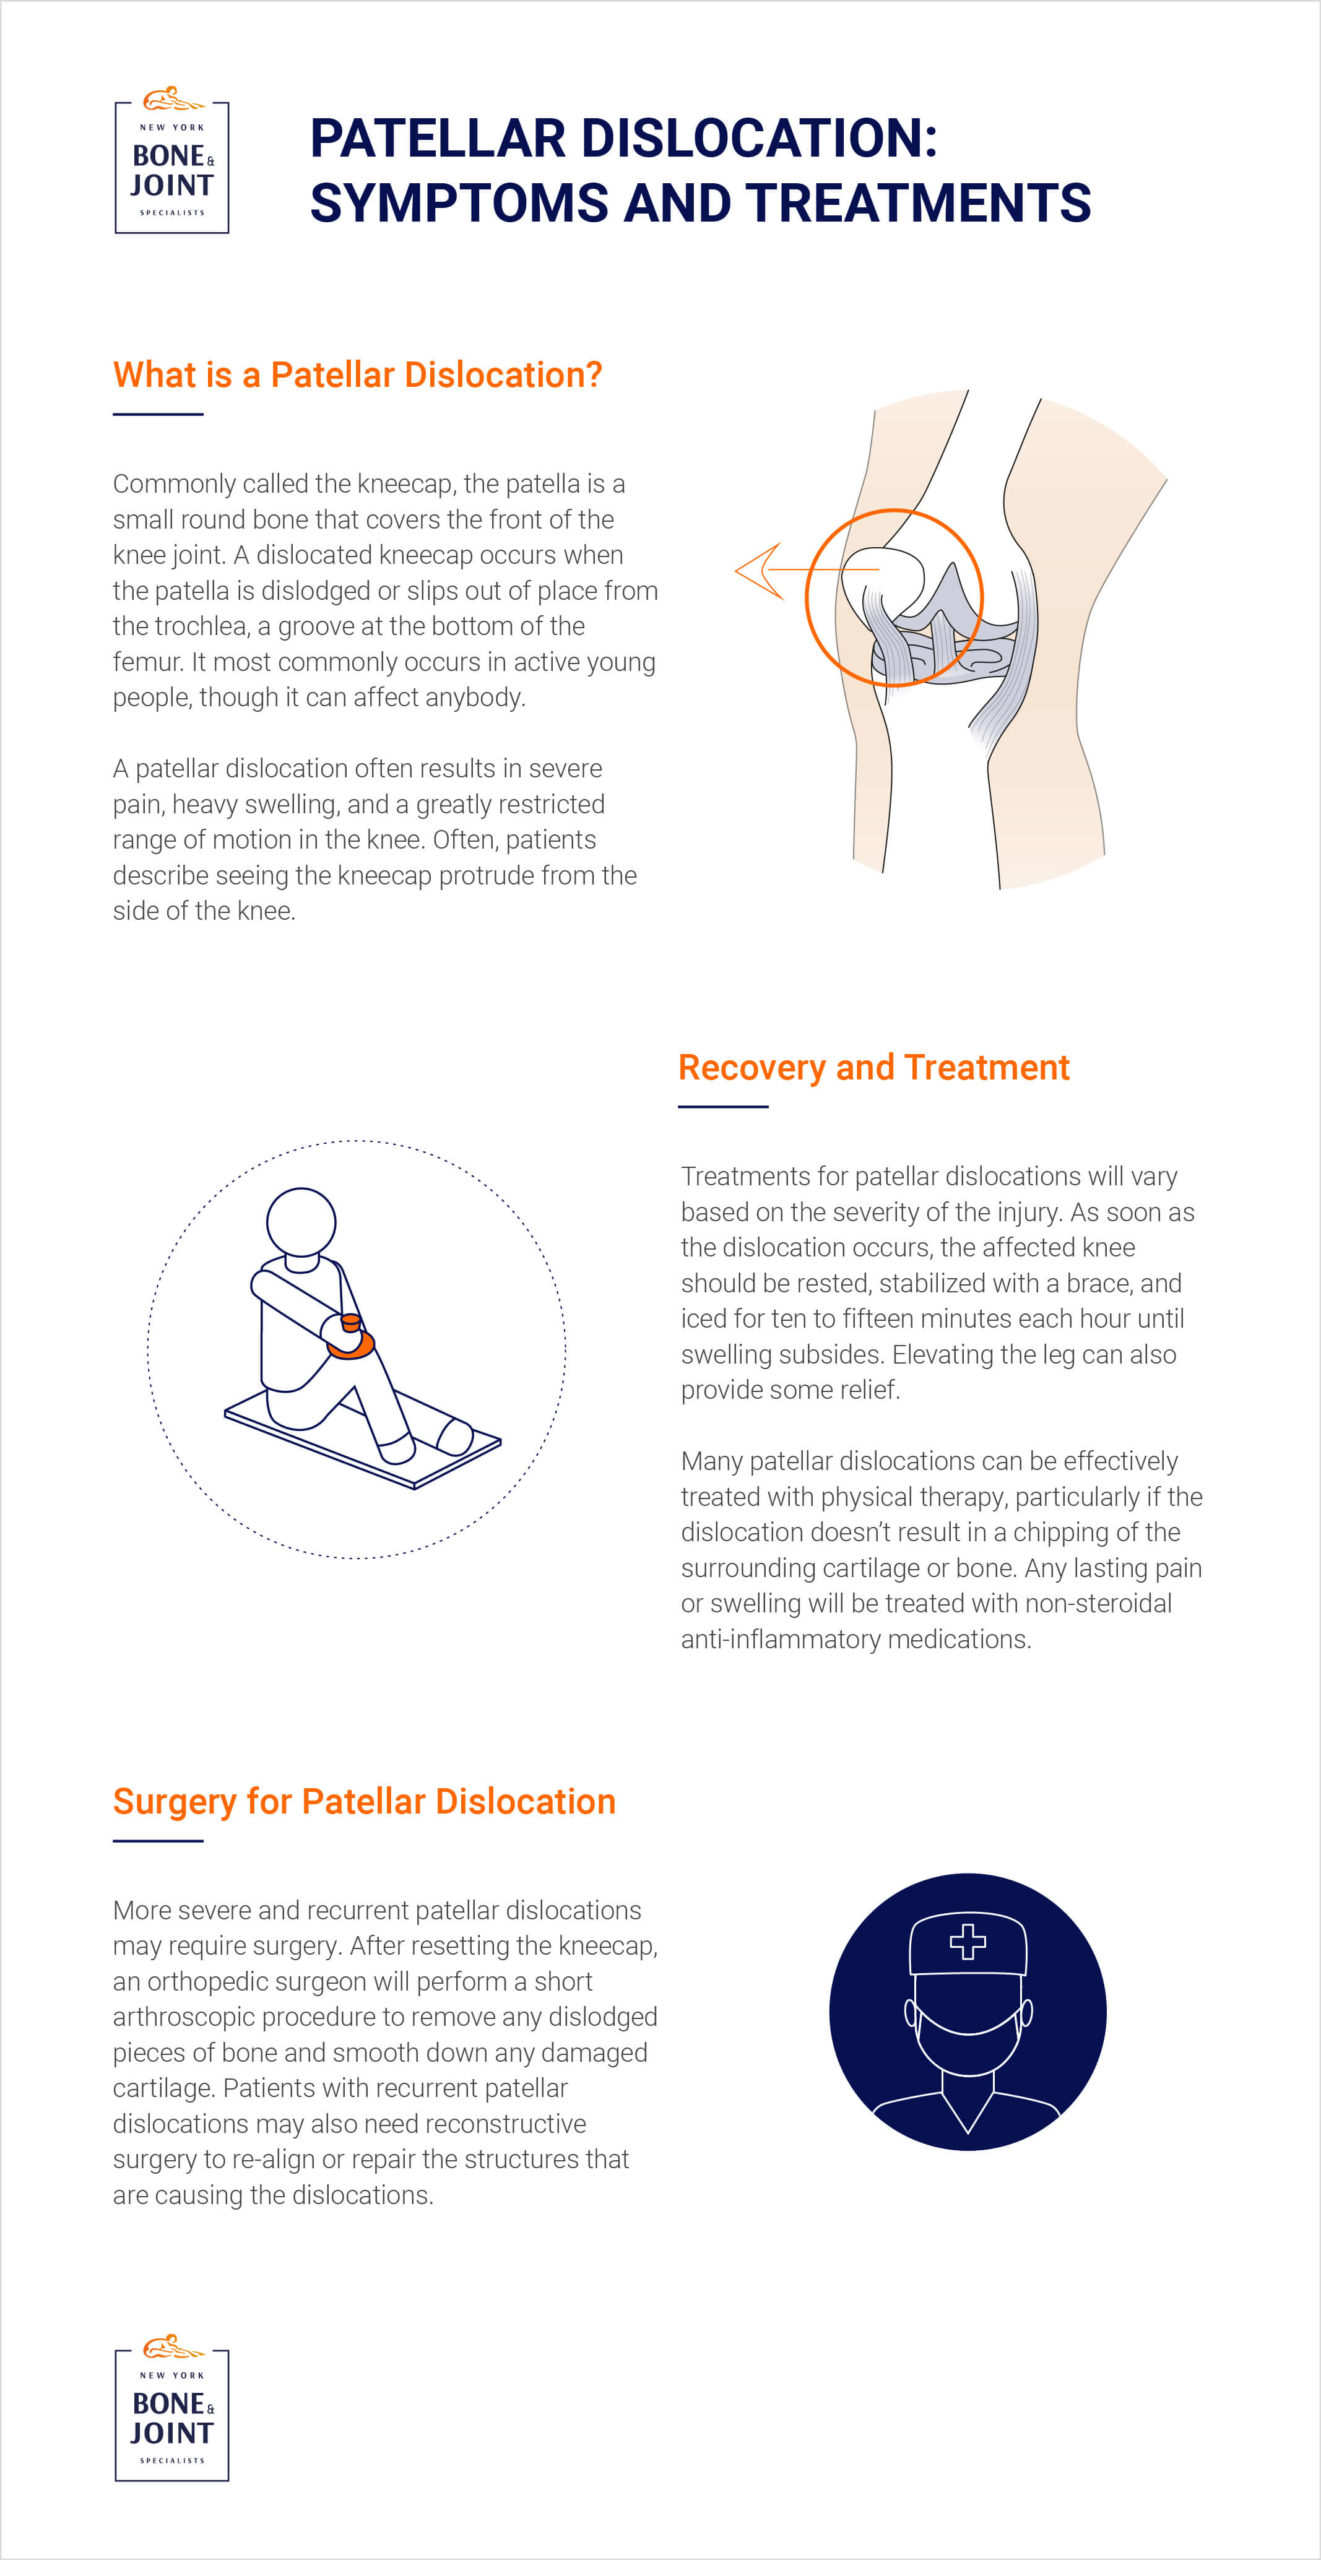 Patellar dislocation treatment with 3 exercises for recovery